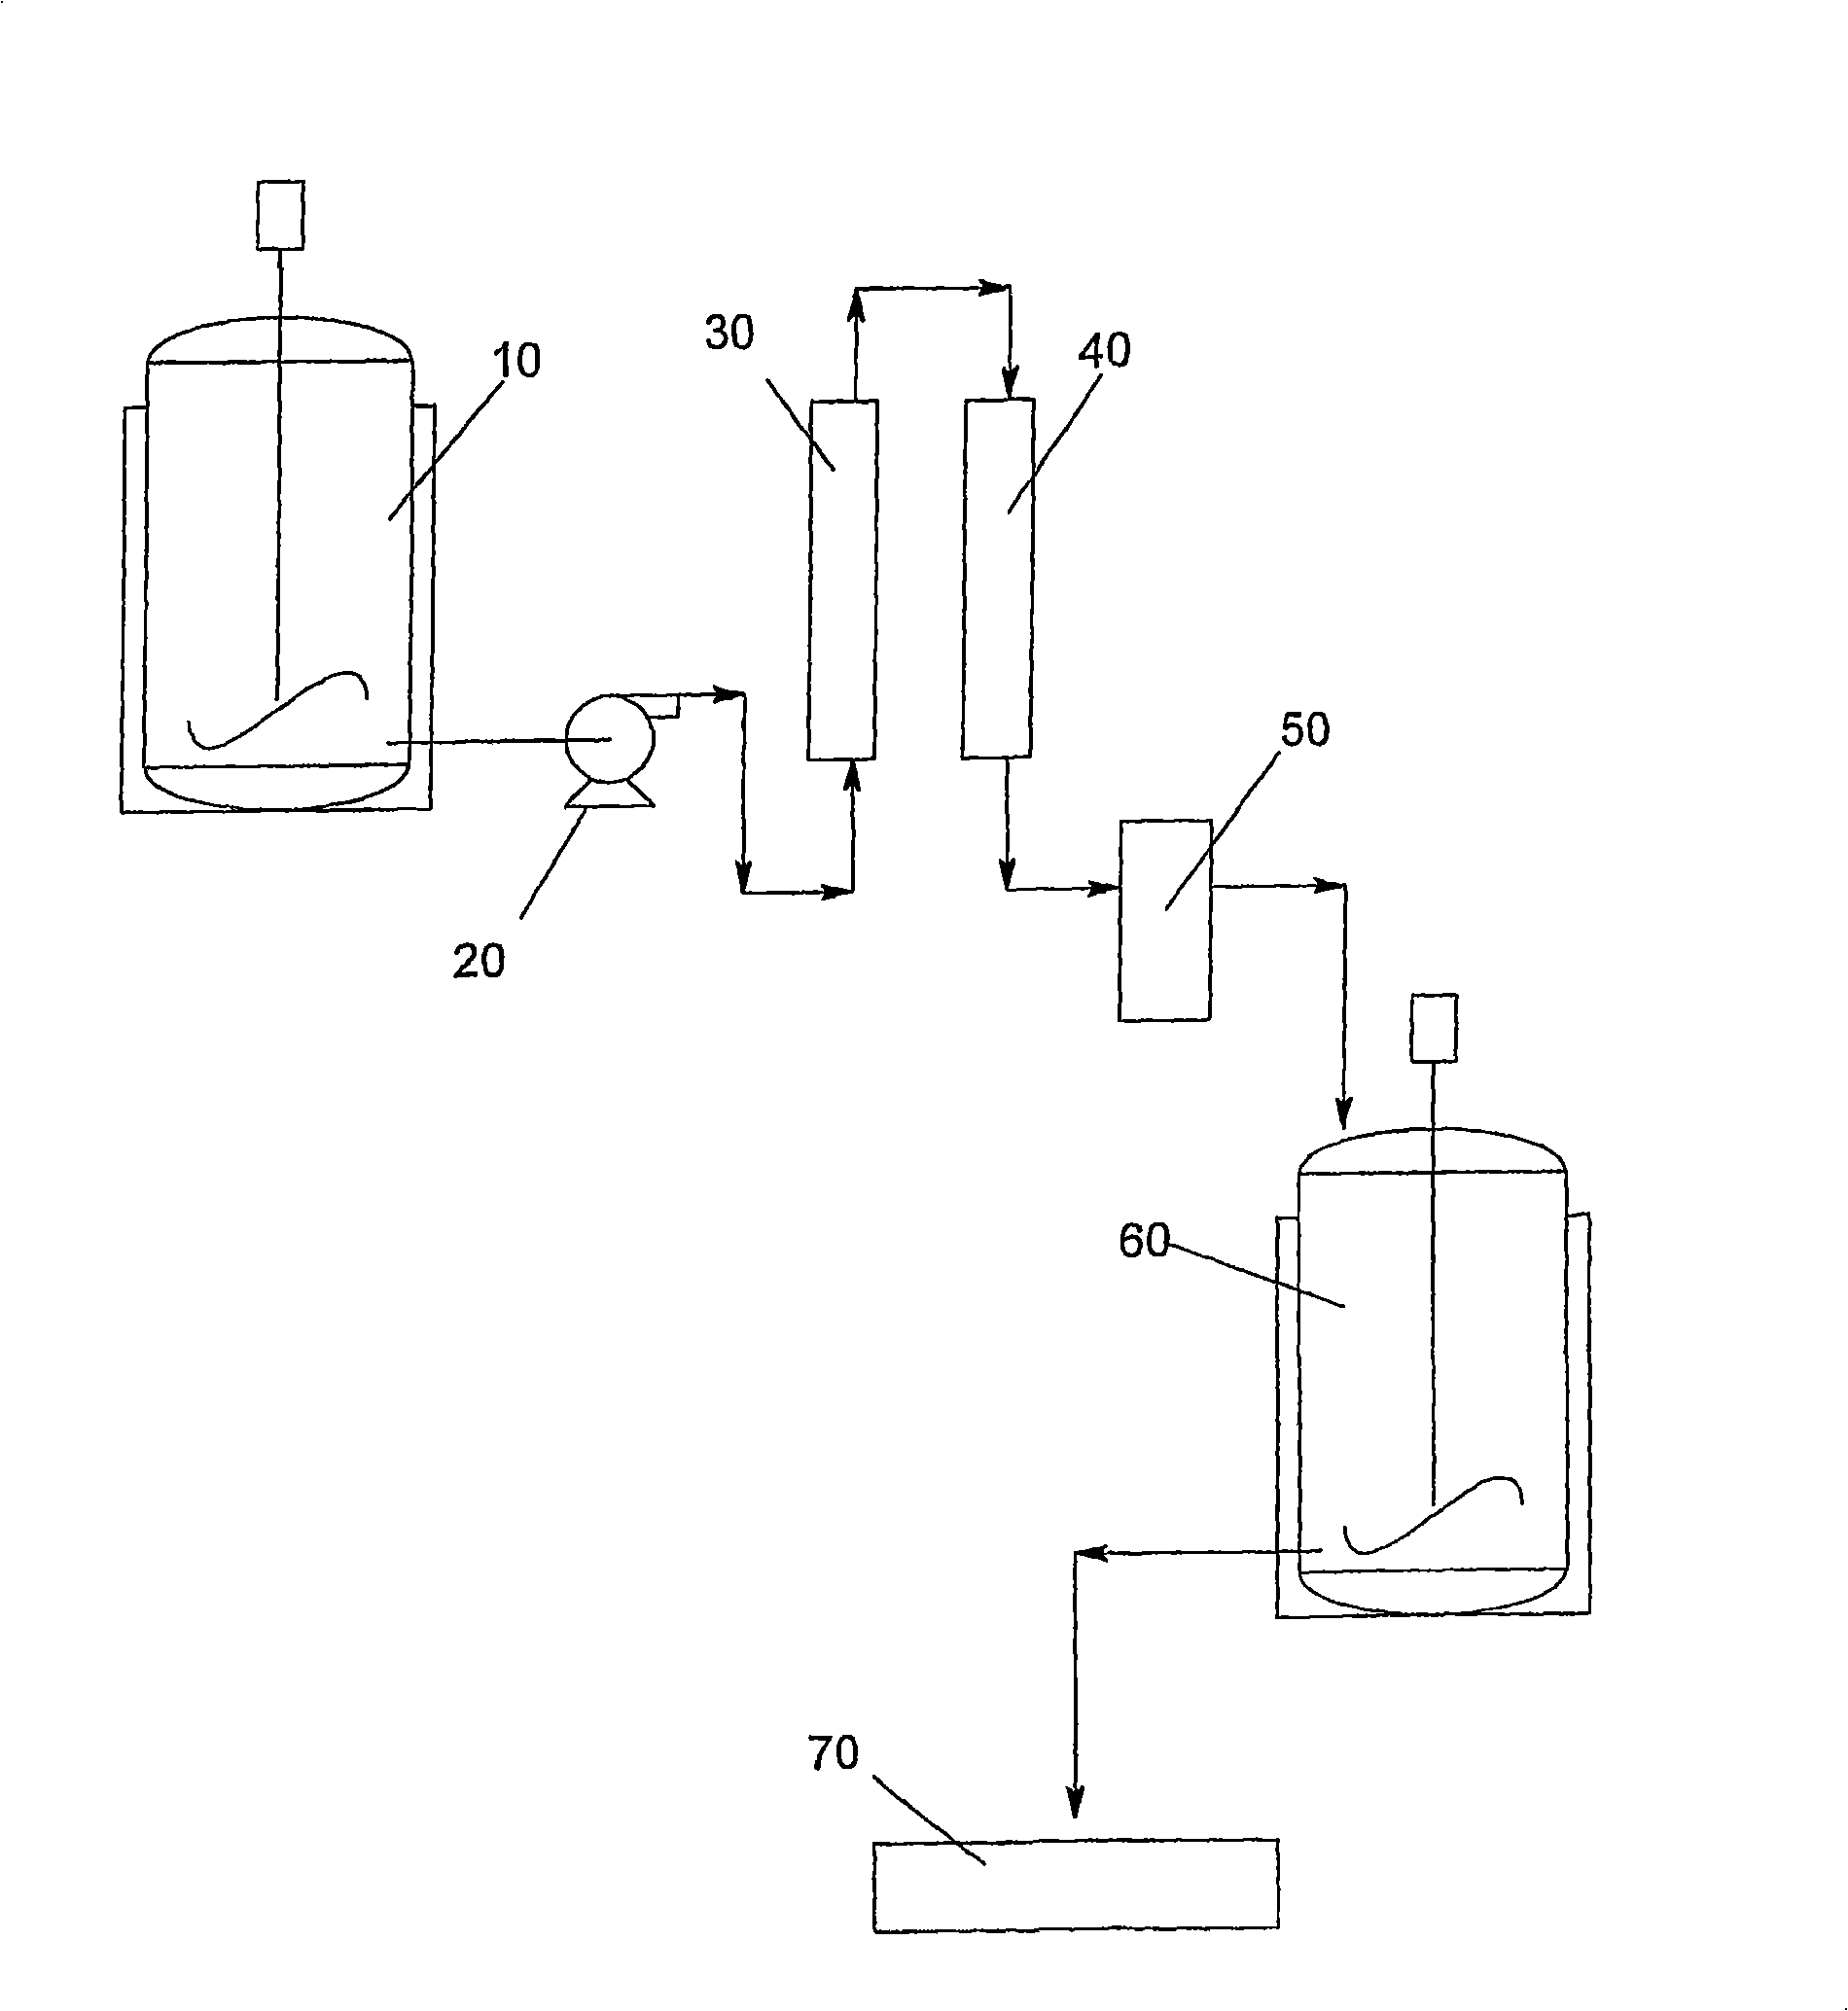 Process for the preparation of (omega-aminoalkylamino)alkyl halides and conversion to amifostine